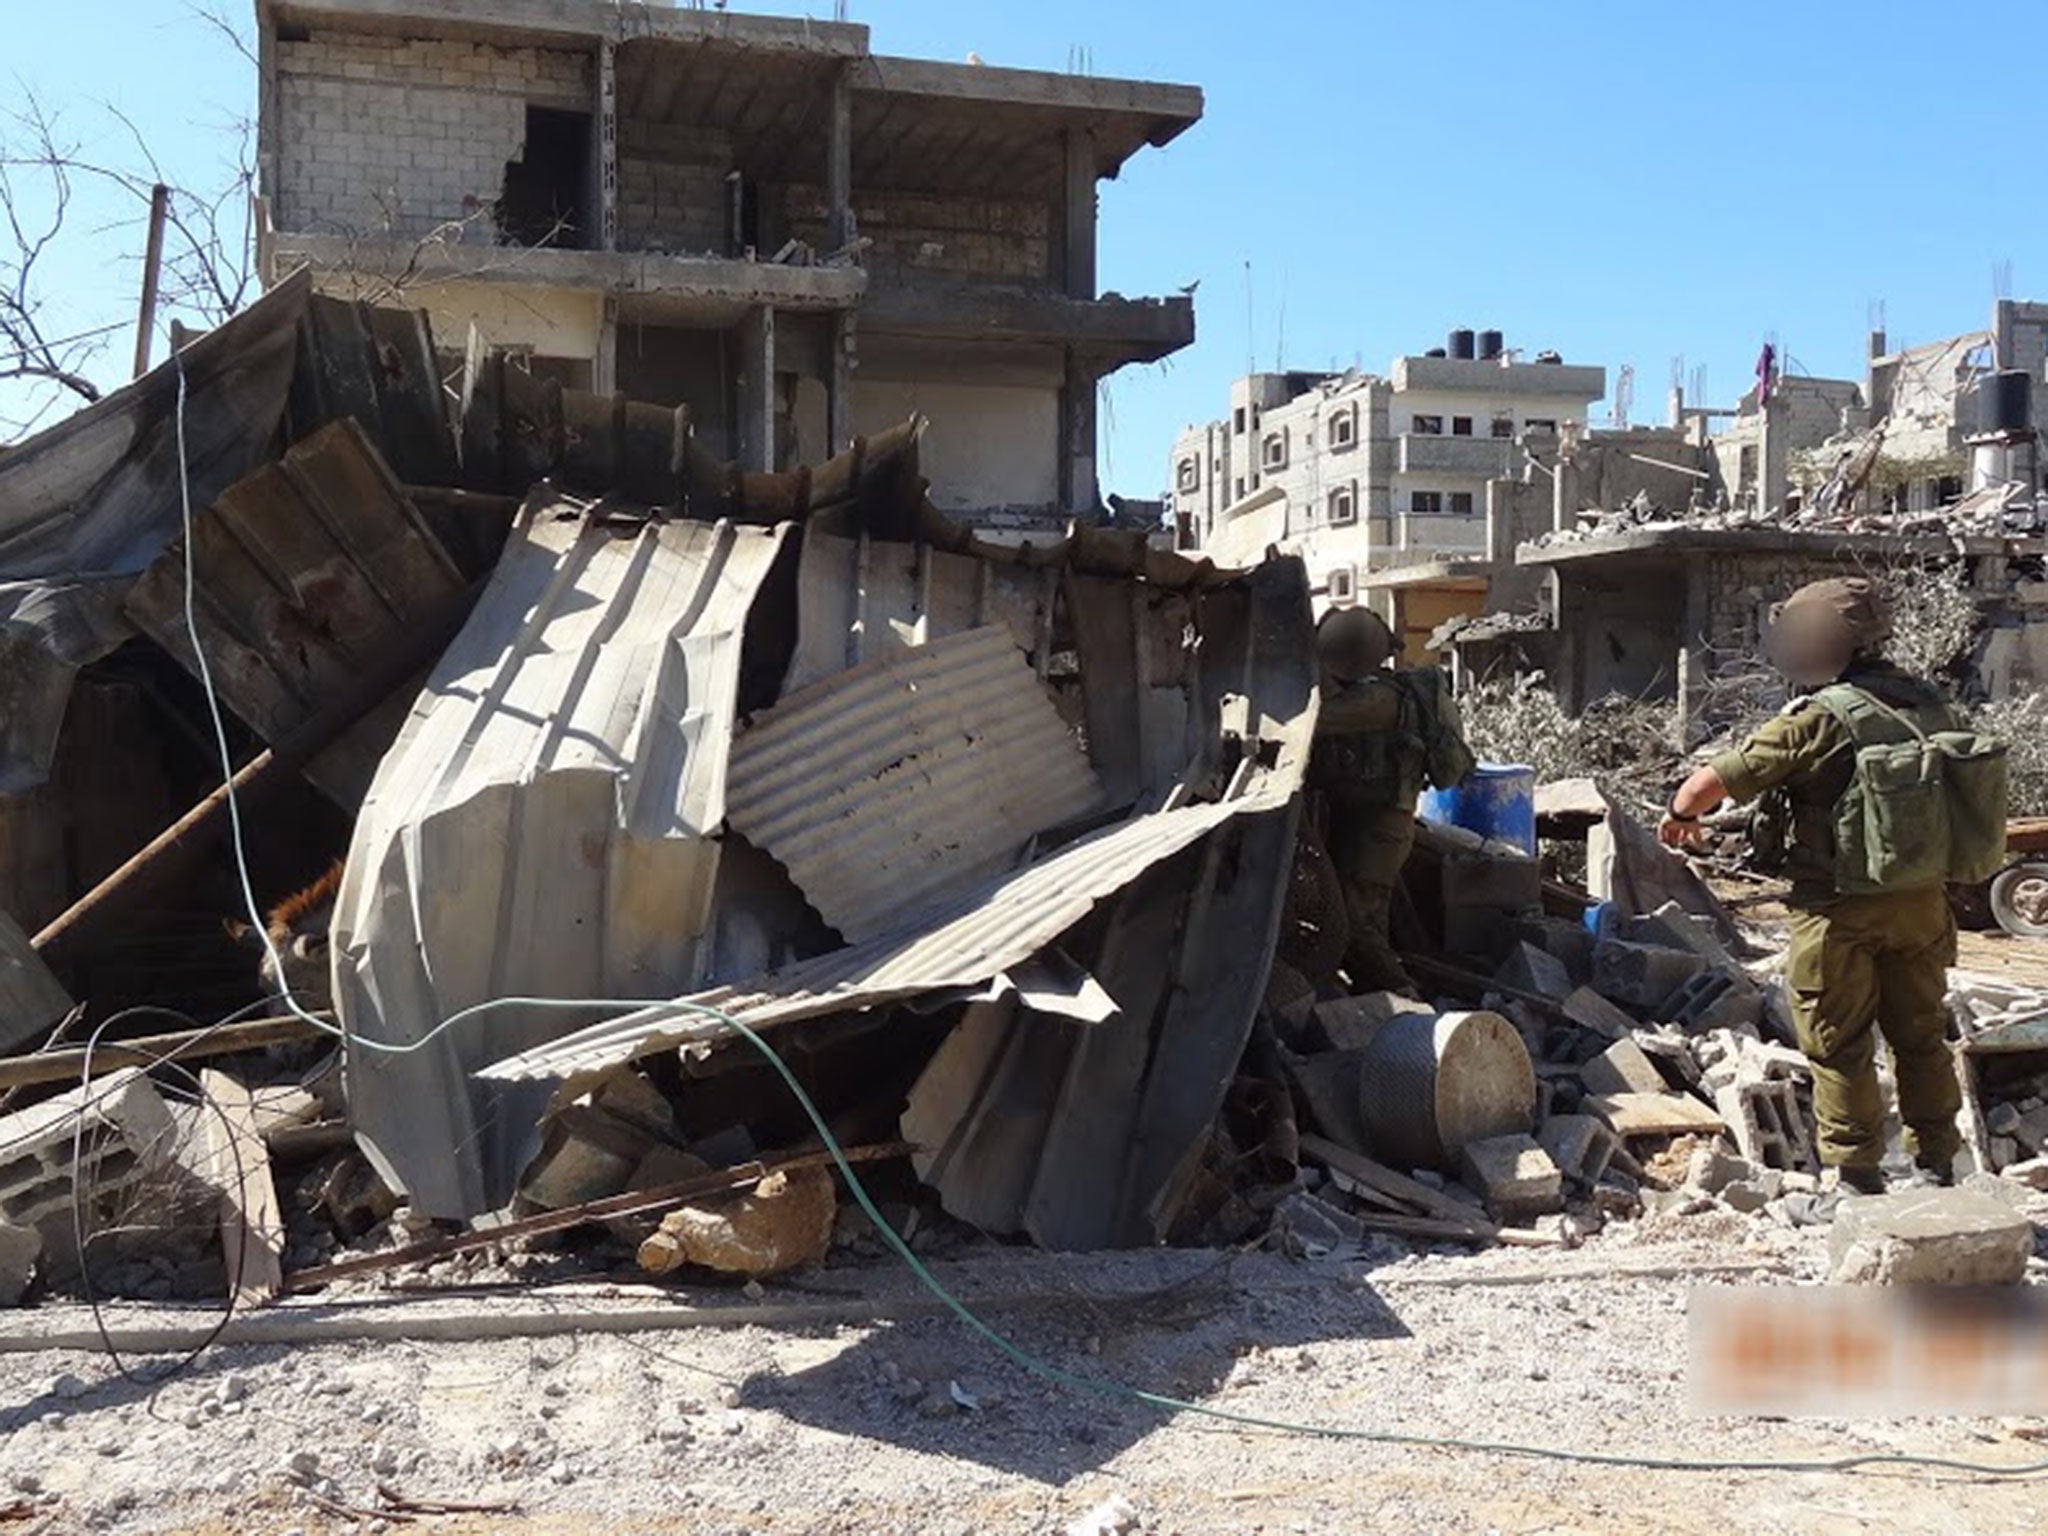 Whole areas of Gaza, particularly Shuja’iyya and Beit Hanoun, were flattened during the campaign